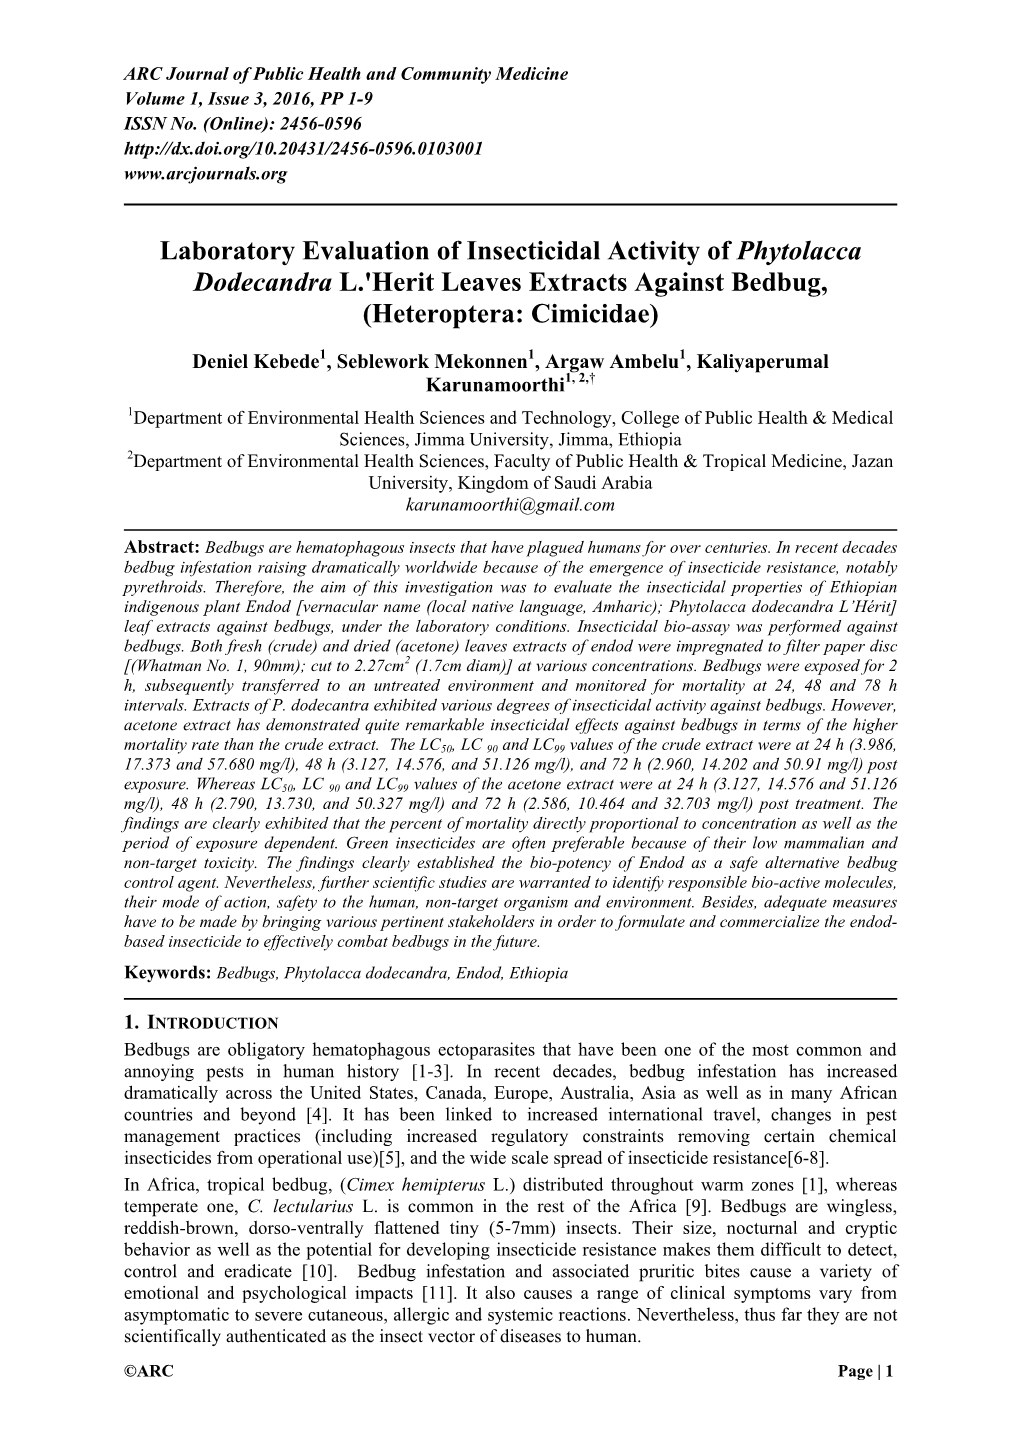 Laboratory Evaluation of Insecticidal Activity of Phytolacca Dodecandra L.'Herit Leaves Extracts Against Bedbug, (Heteroptera: Cimicidae)